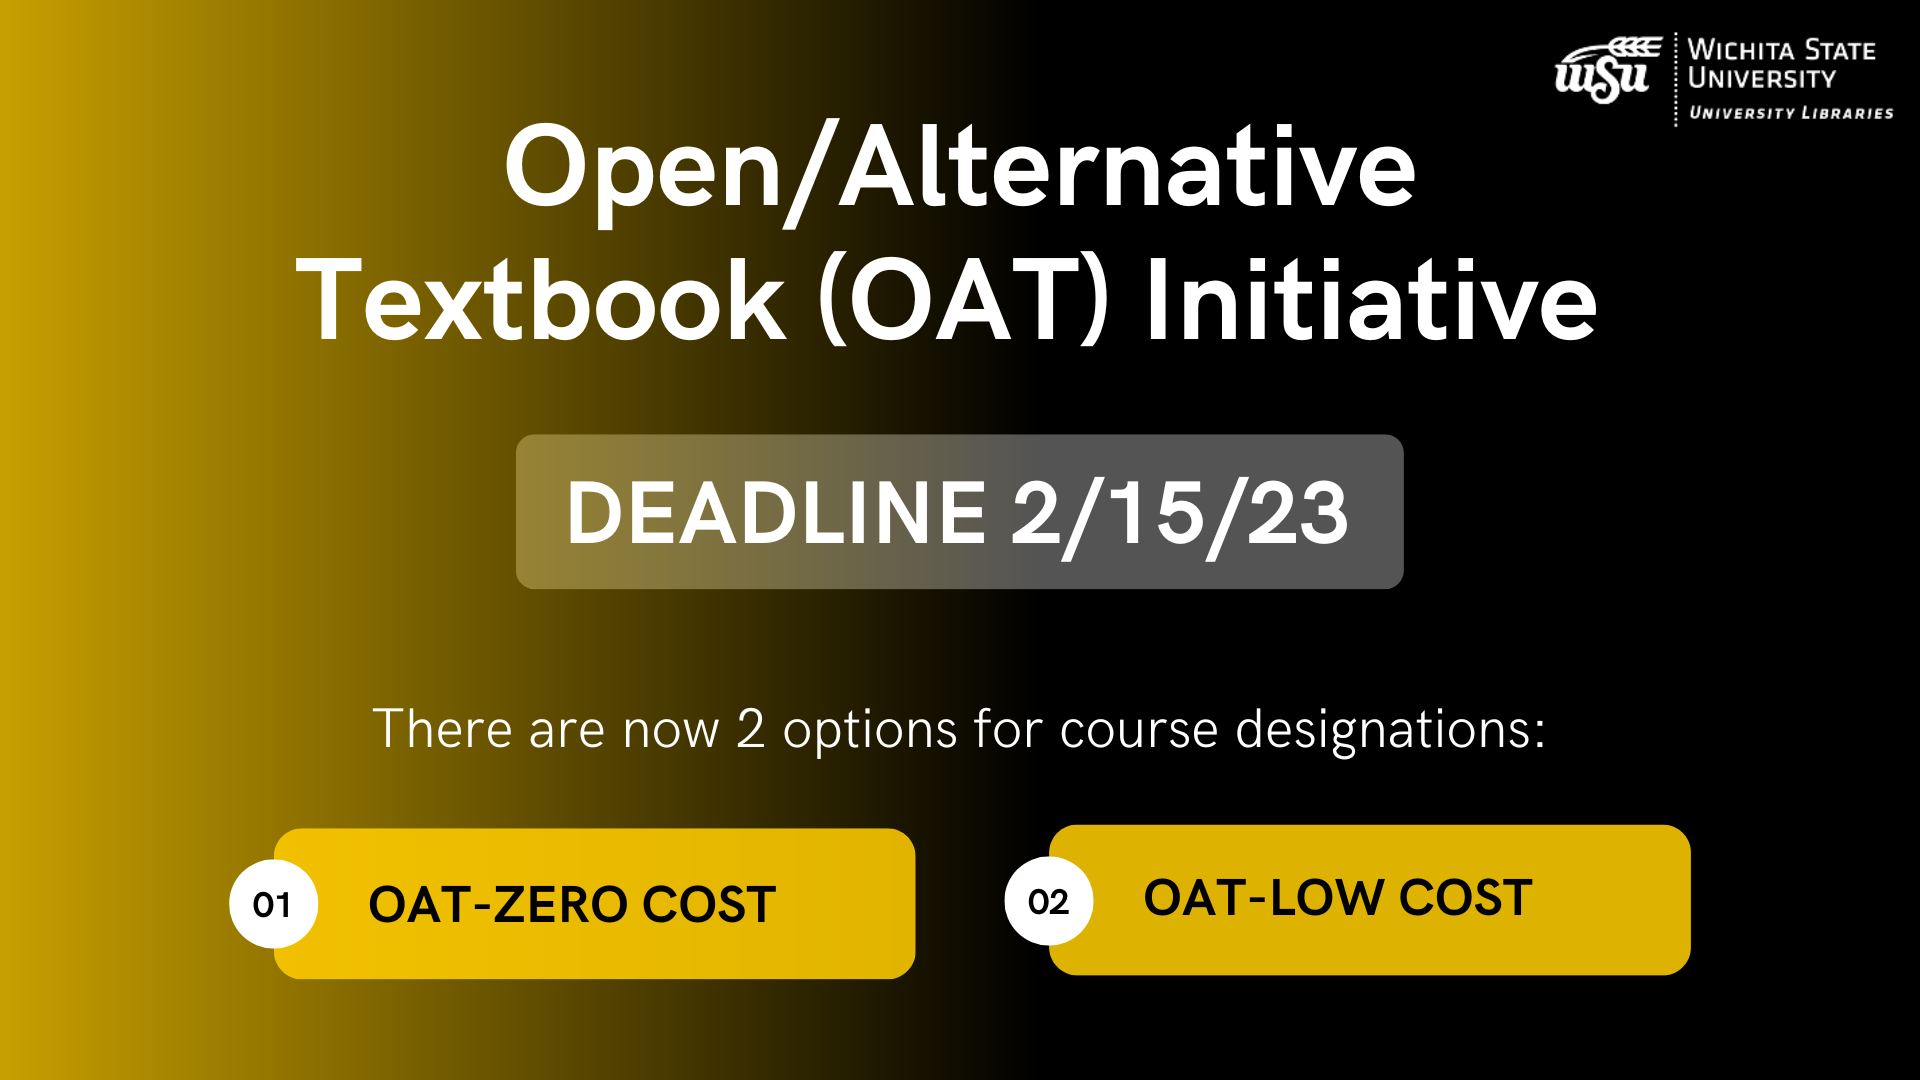 Open/Alternative Textbook (OAT) Initiative deadline on 2/15/23 There are now two options for course designations: OAT-ZERO Cost, OAT-LOw Cost